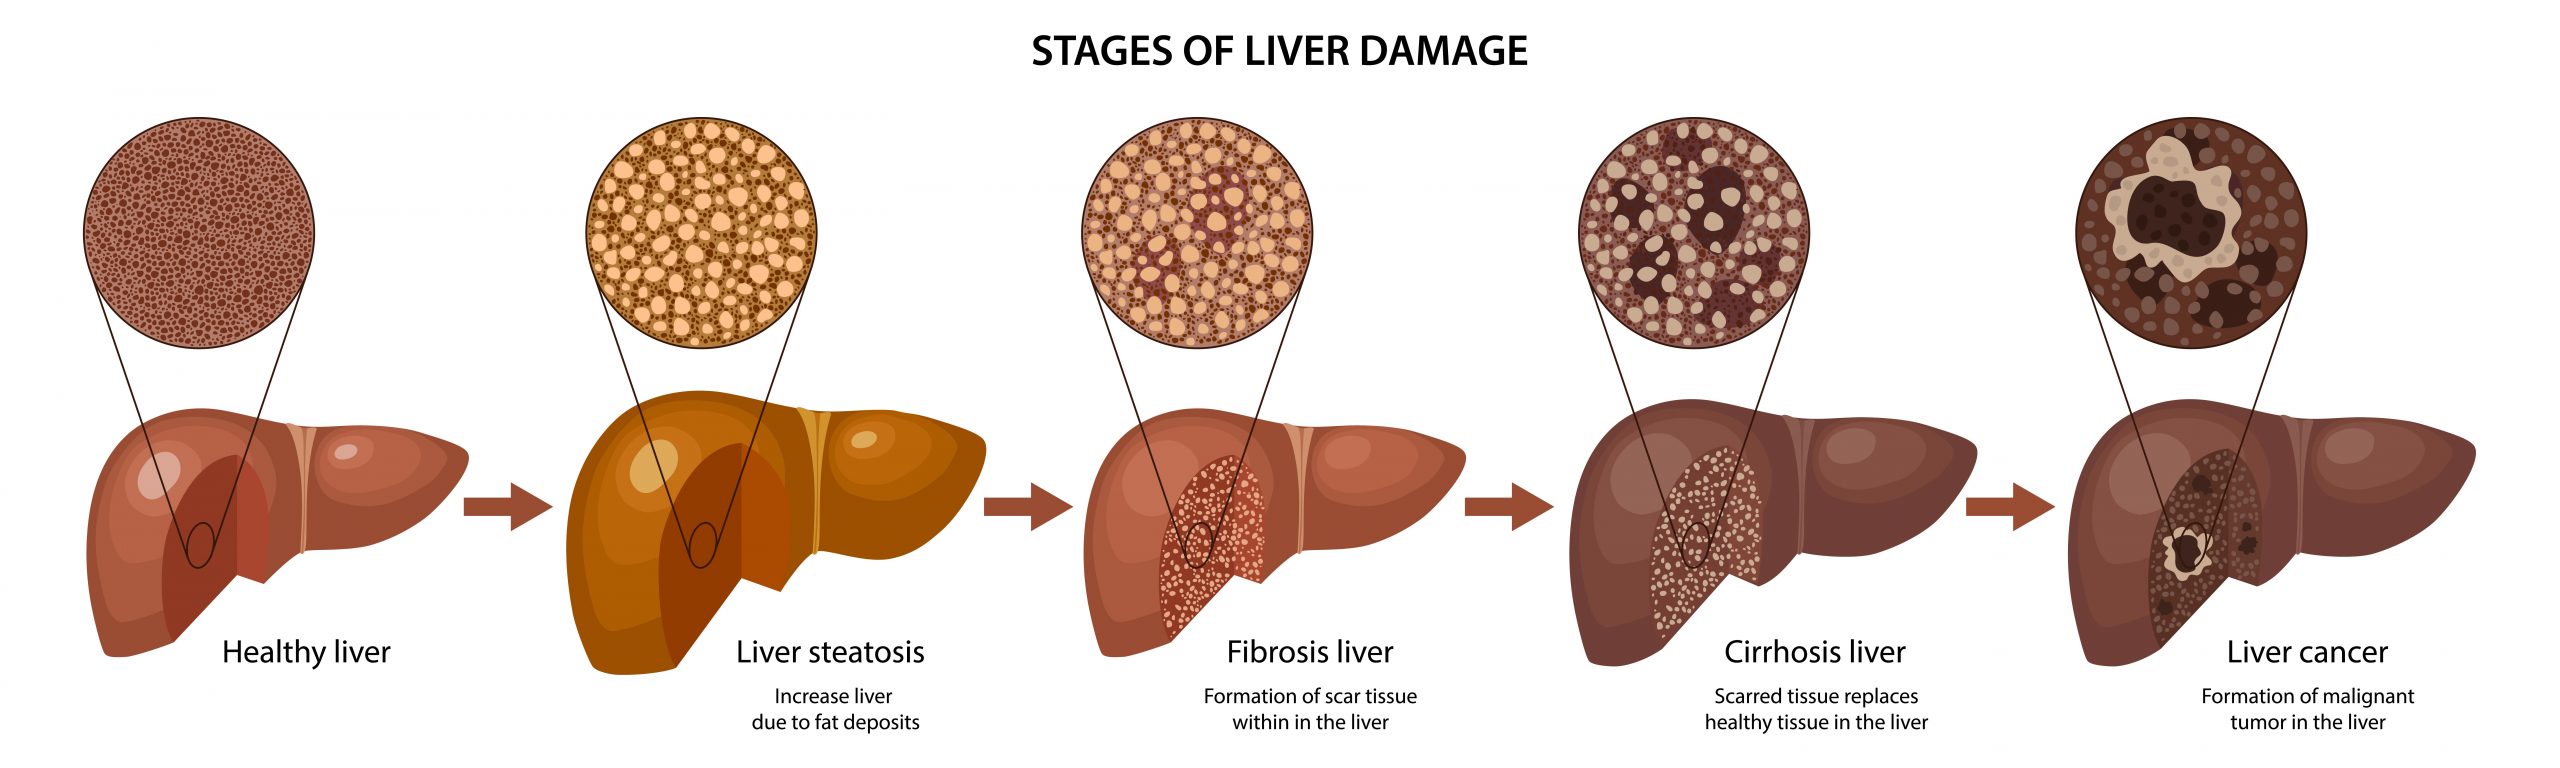 diagram showing the stages of liver disease progression and its impact on tissues. Left to right normal, liver steatosis (fatty liver), liver fibrosis, liver cirrhosis, liver cancer